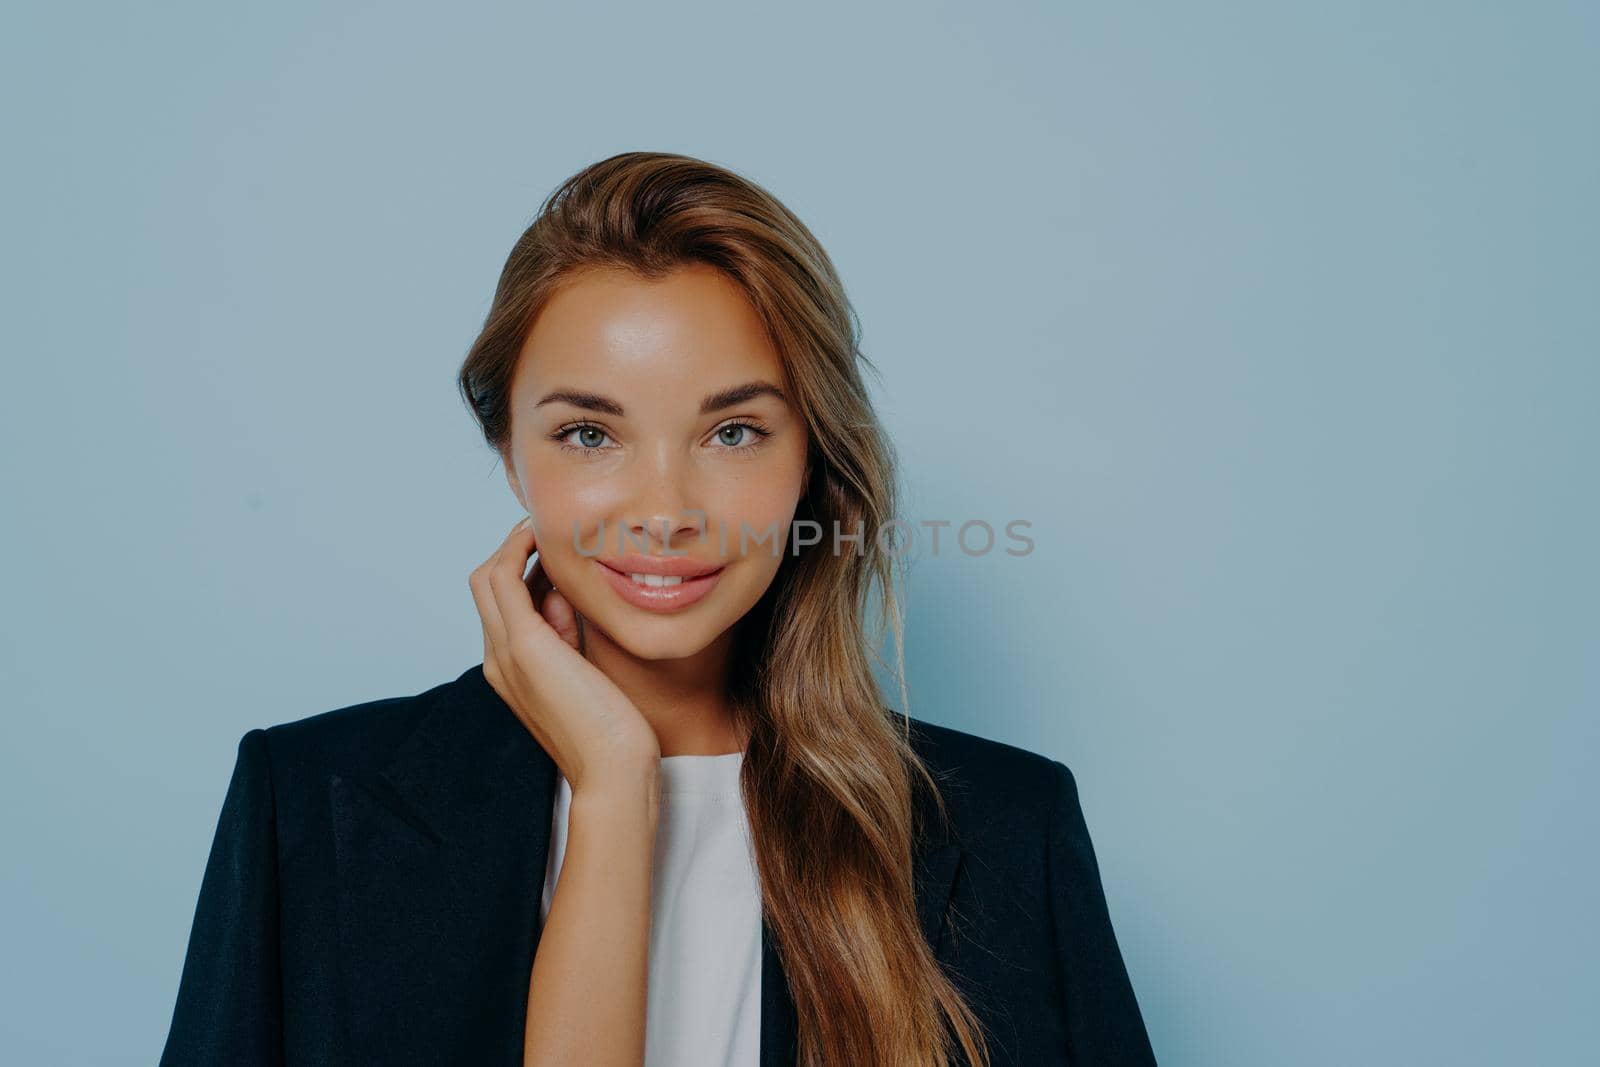 Attractive woman with gentle smile against light blue background by vkstock